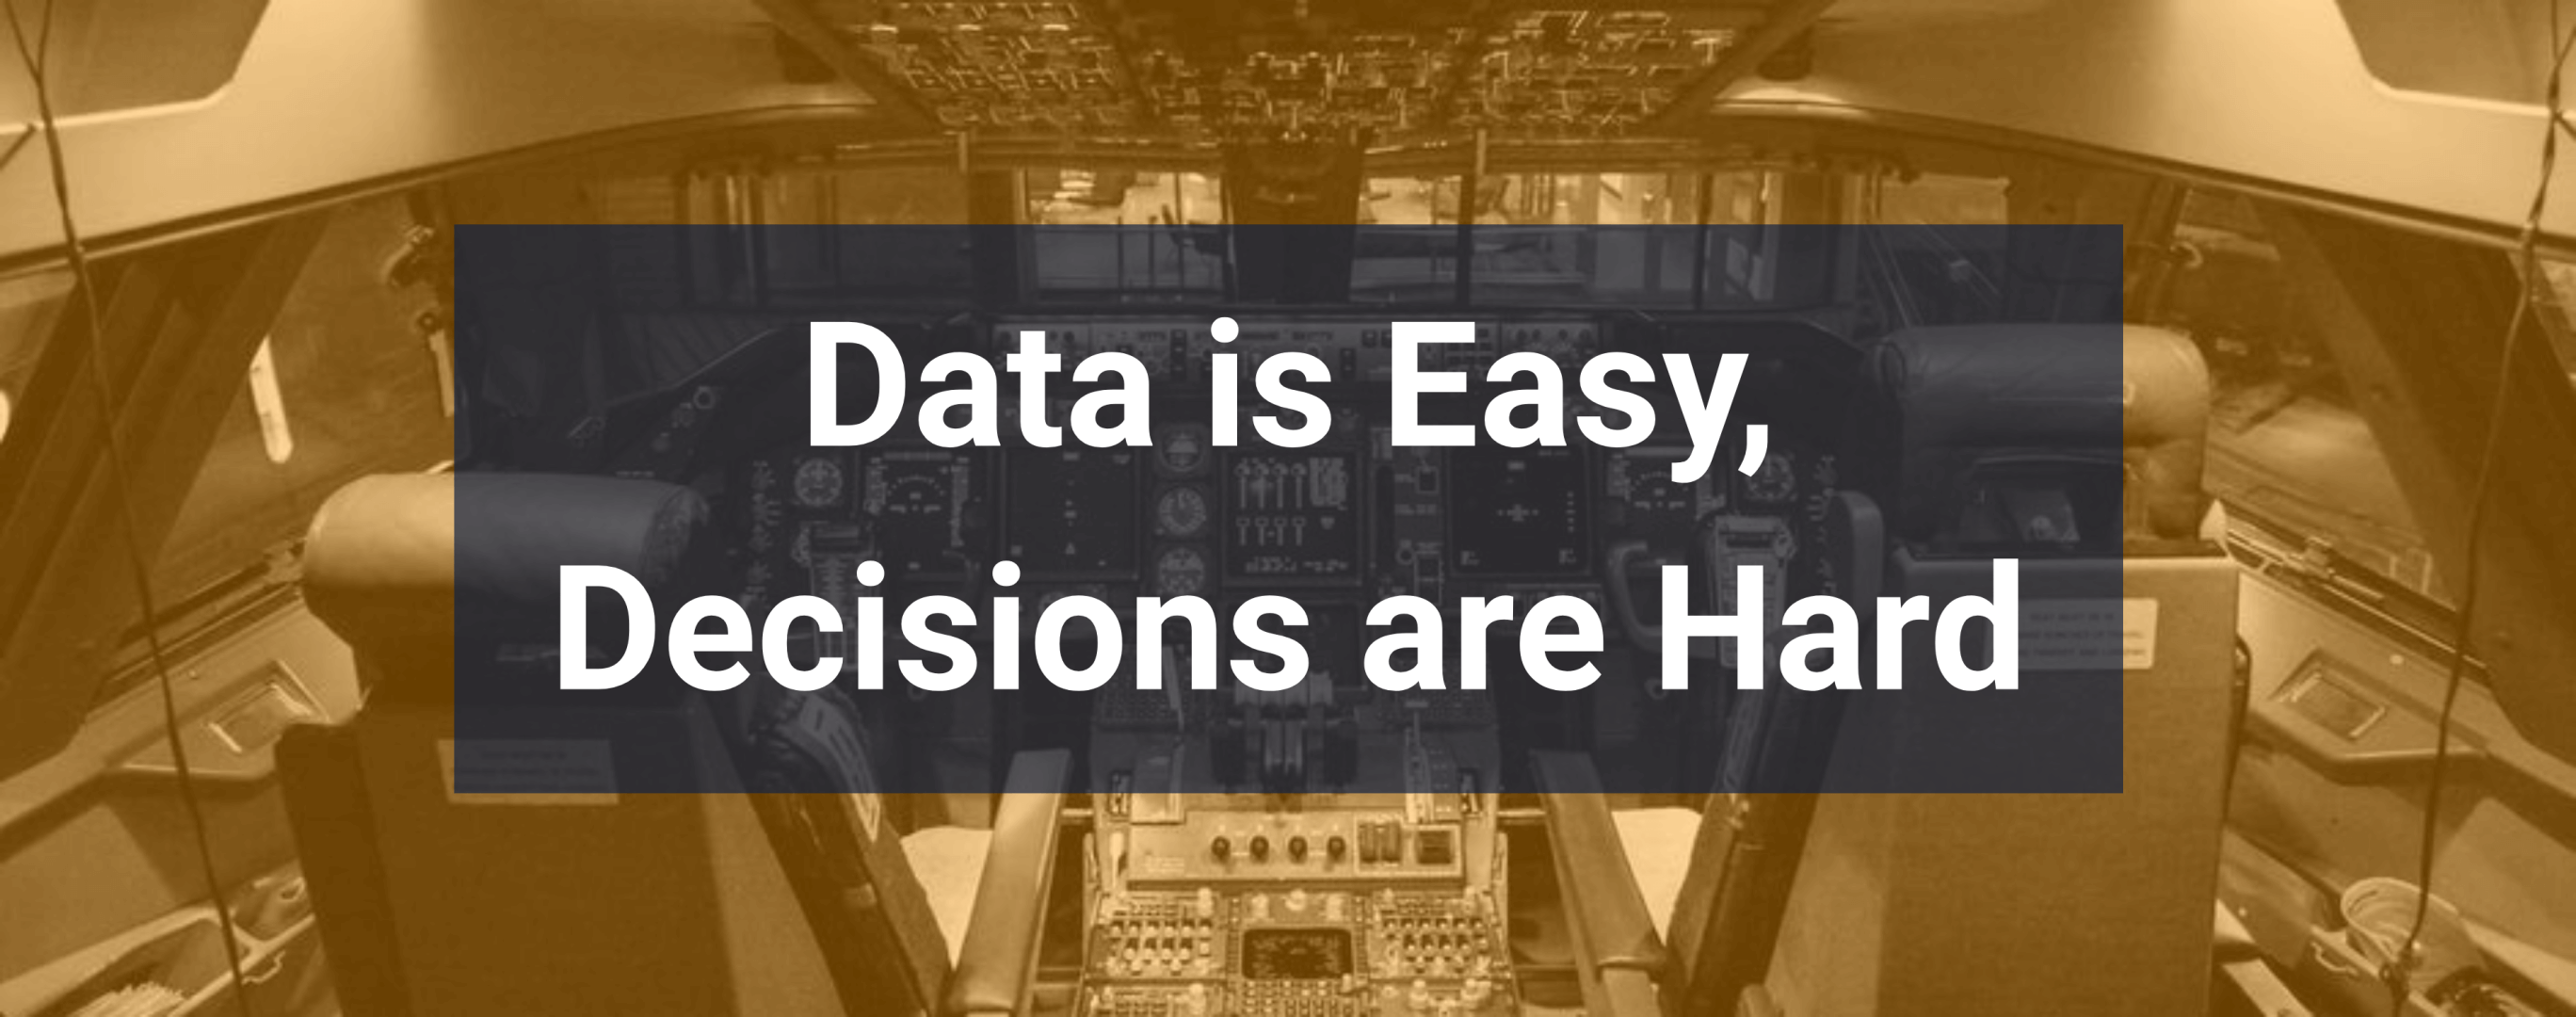 Data is Easy, Decisions are Hard